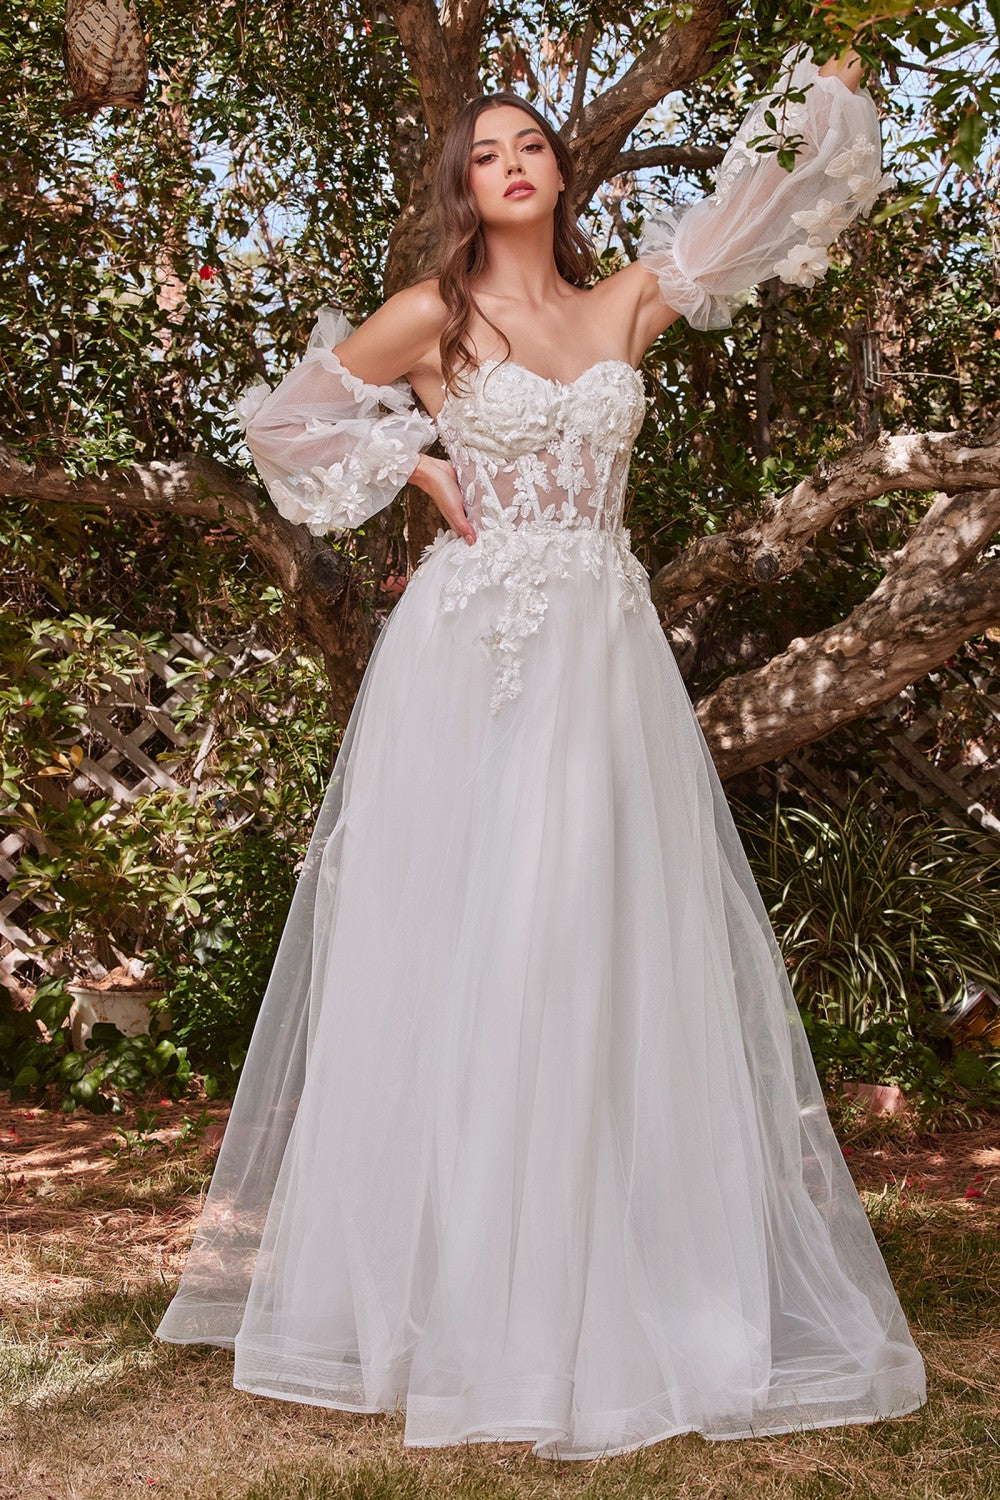 Sparkling Wedding Dress With Detachable Skirt – D&D Clothing